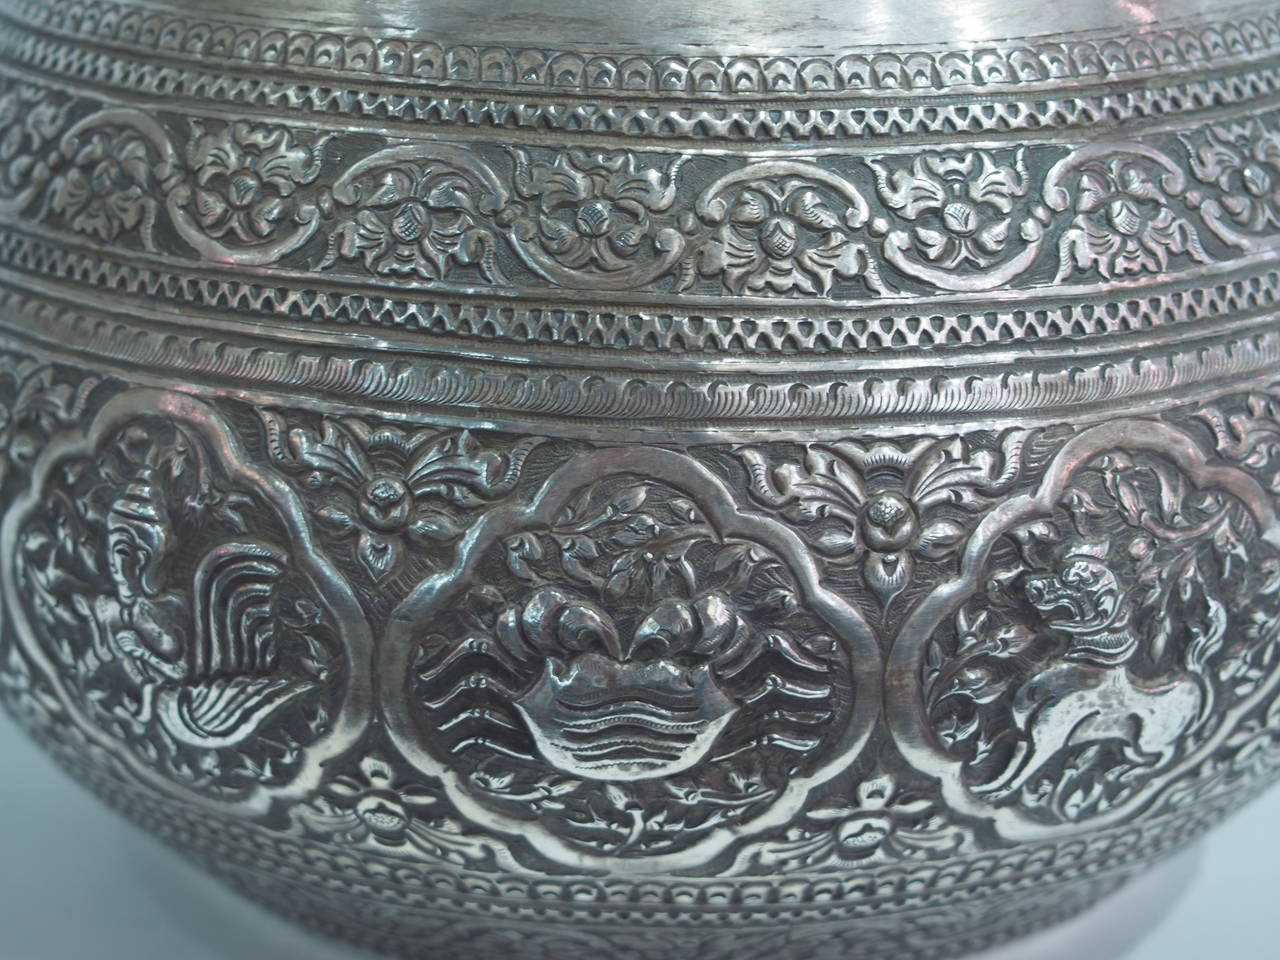 Hand-Crafted Old Hand-Worked Solid Silver Burmese Ceremonial Zodiac Bowl